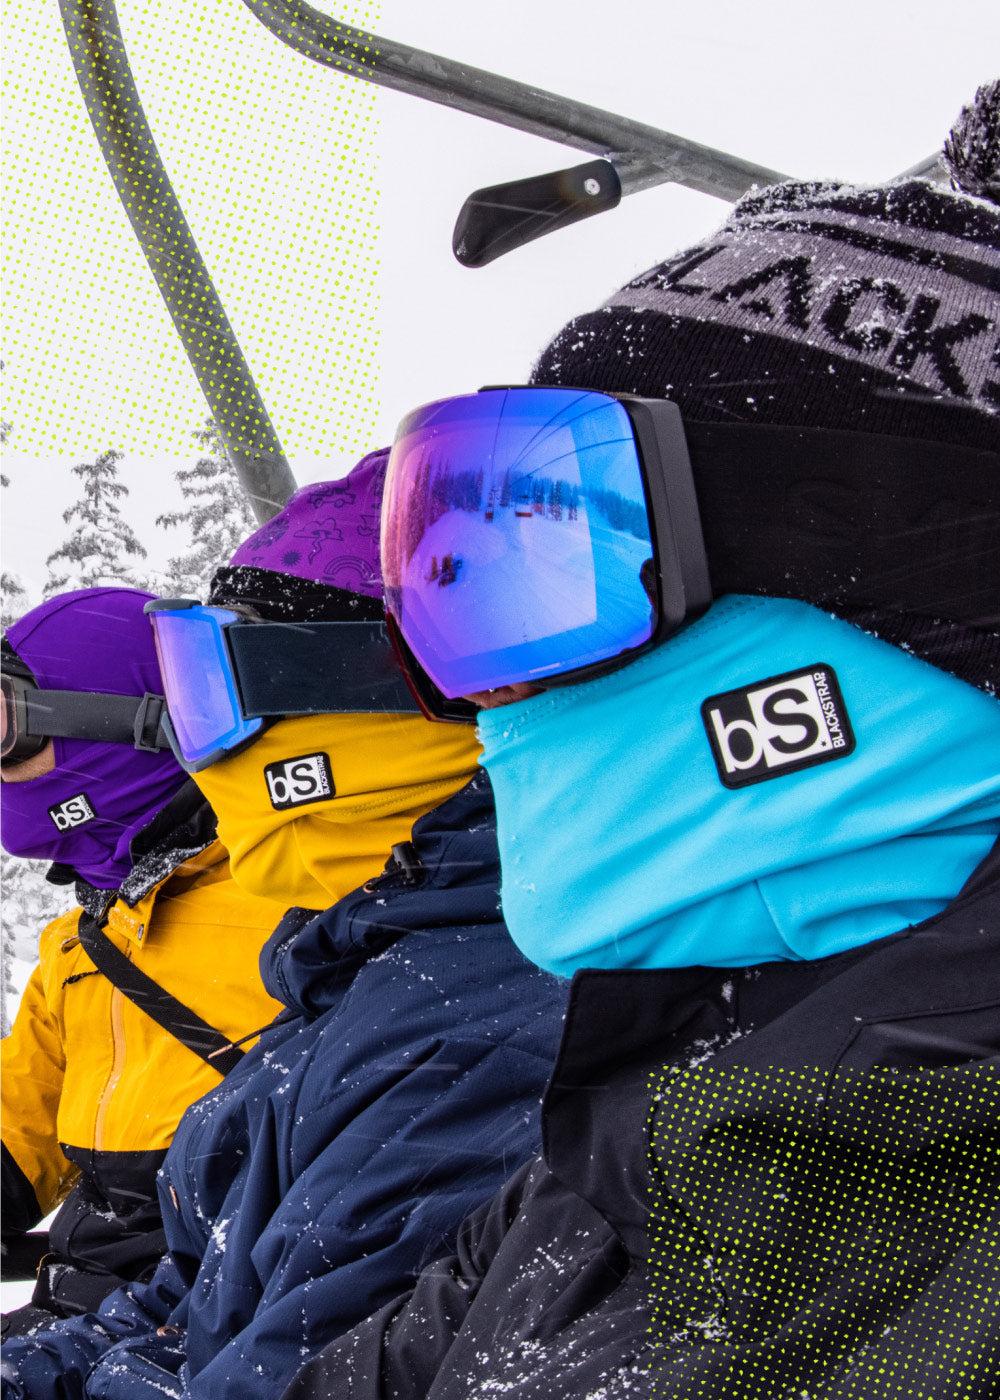 Balaclava Ski Masks designed with unrivaled performance & protection from the elements